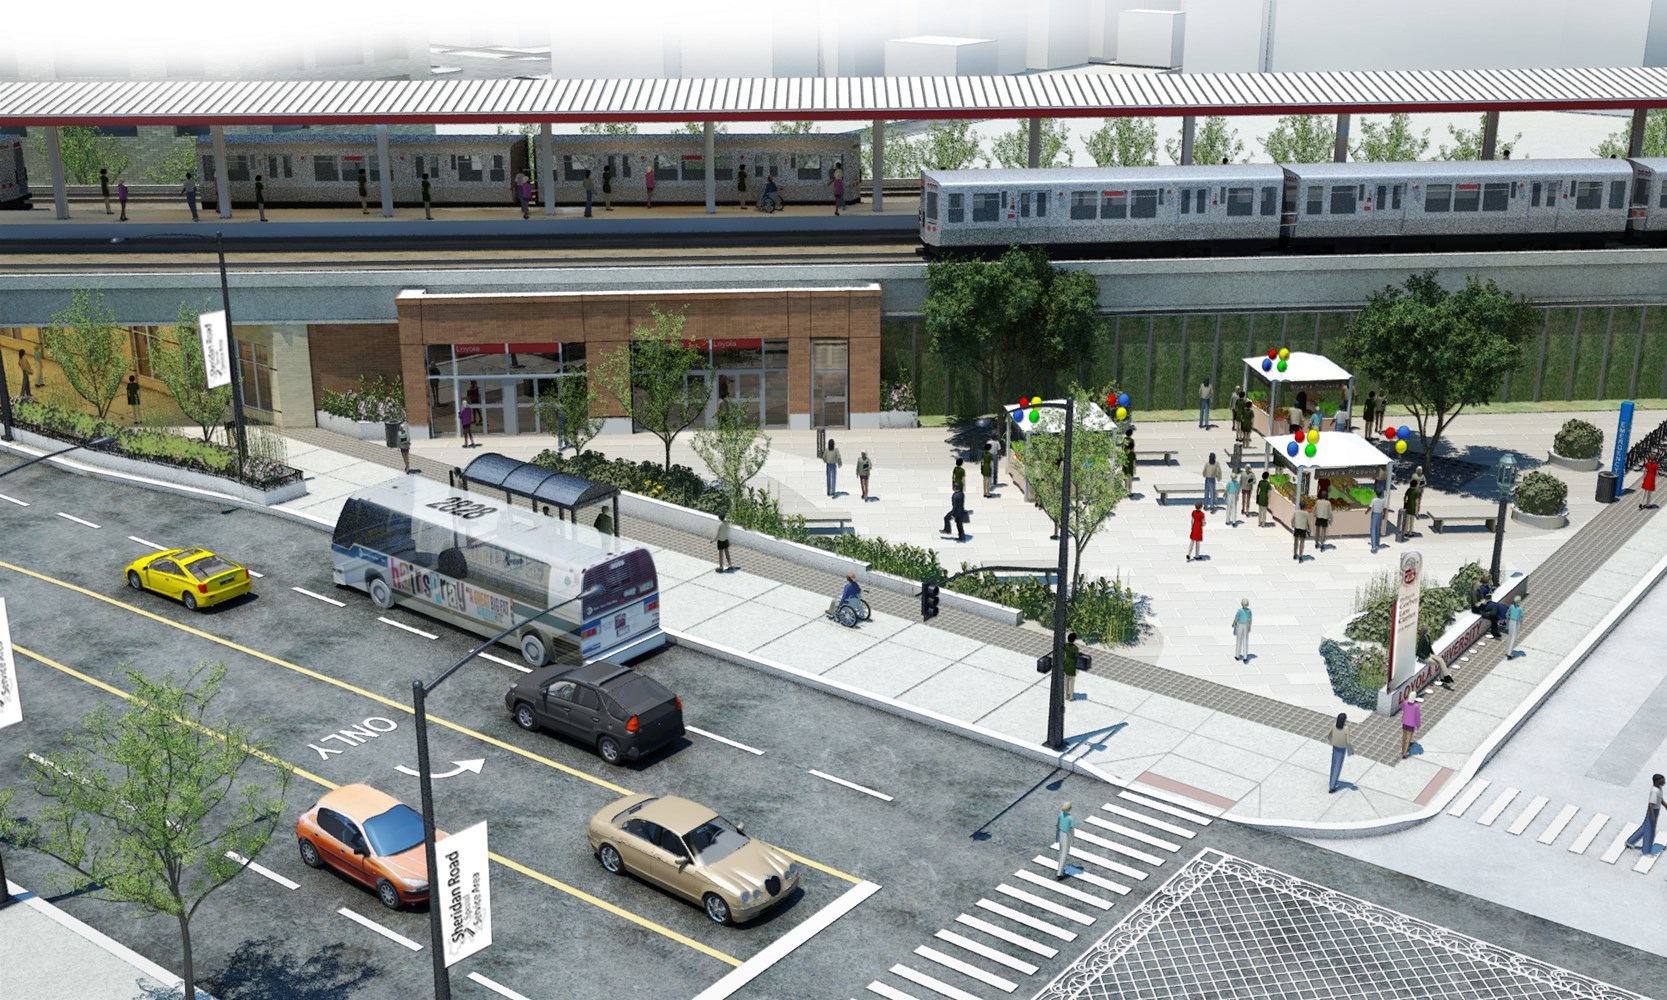 rendering of future loyola station